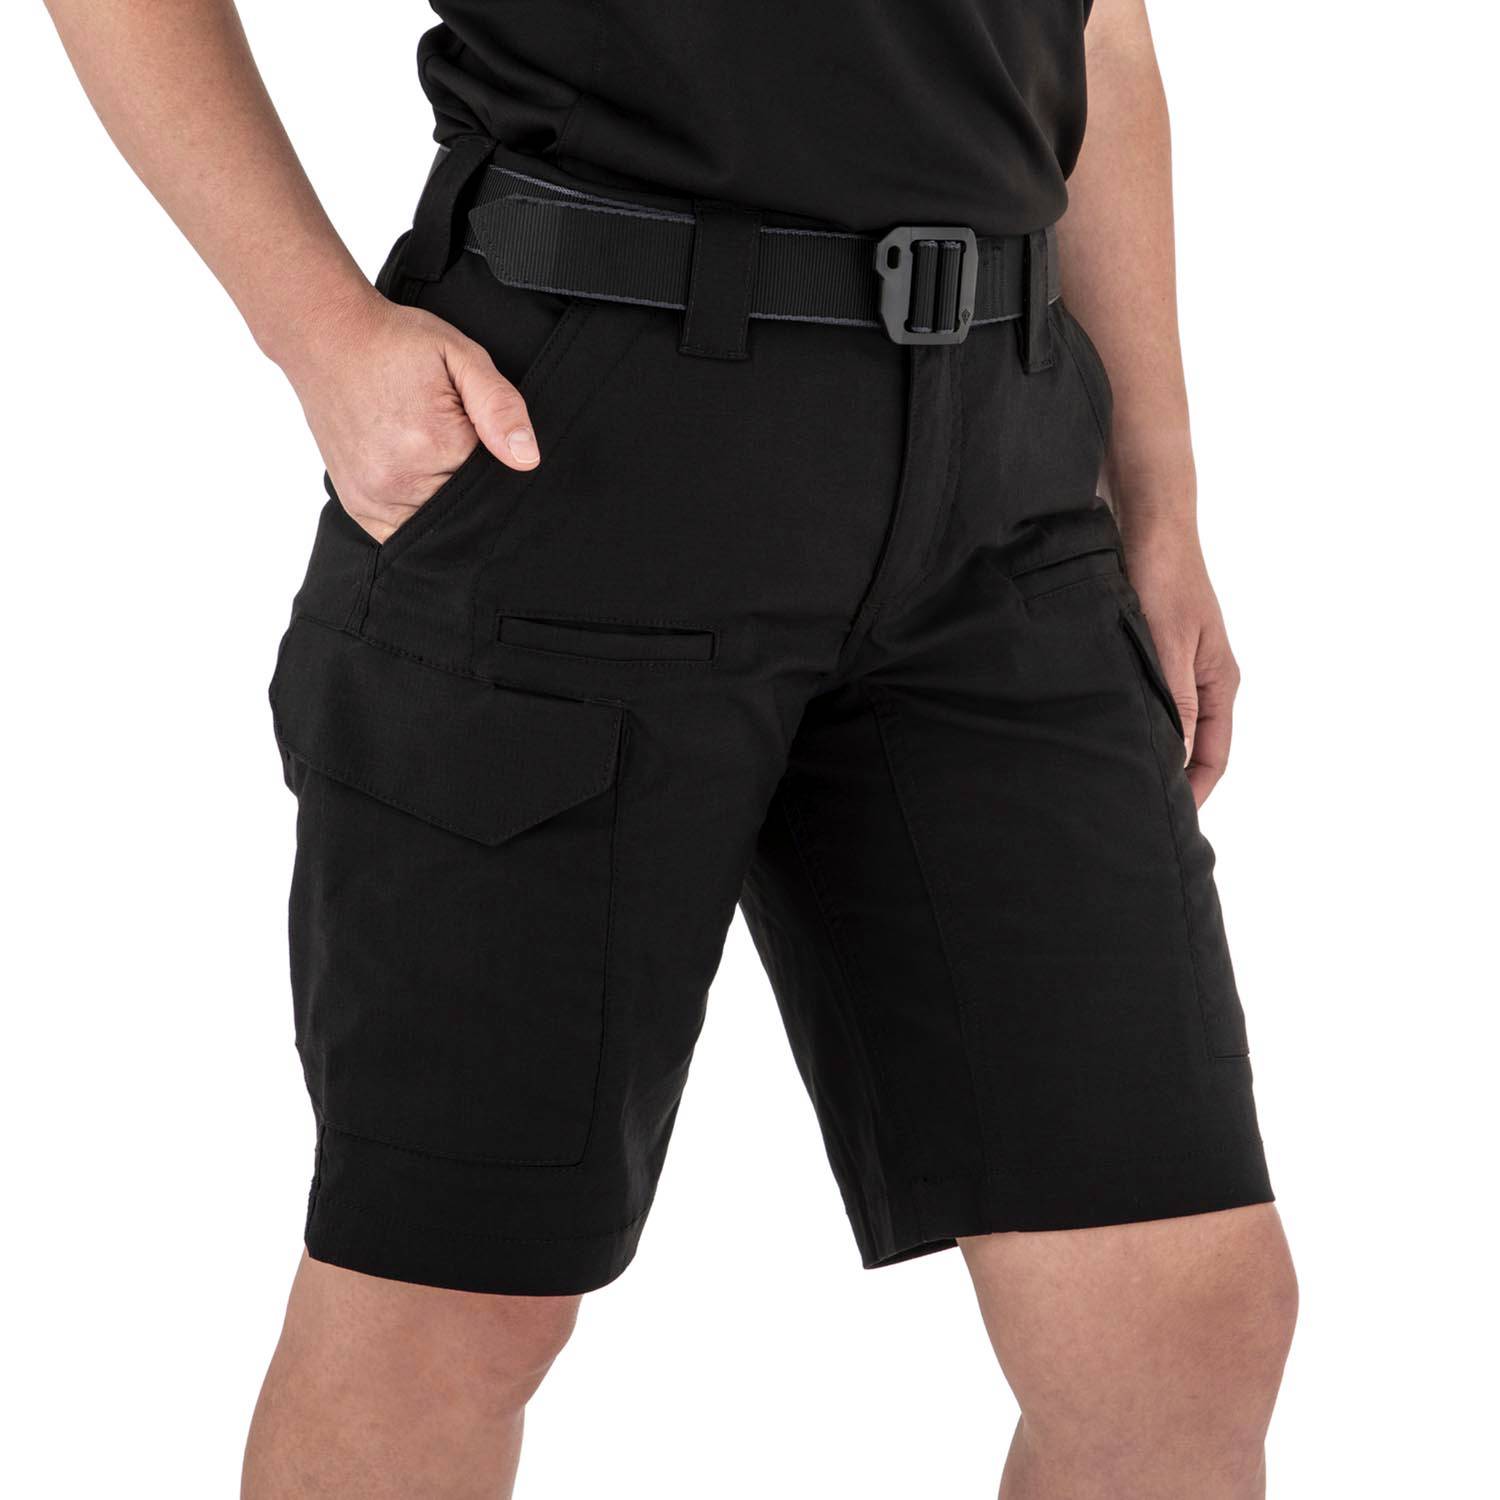 FIRST TACTICAL WOMEN'S V2 TACTICAL SHORTS